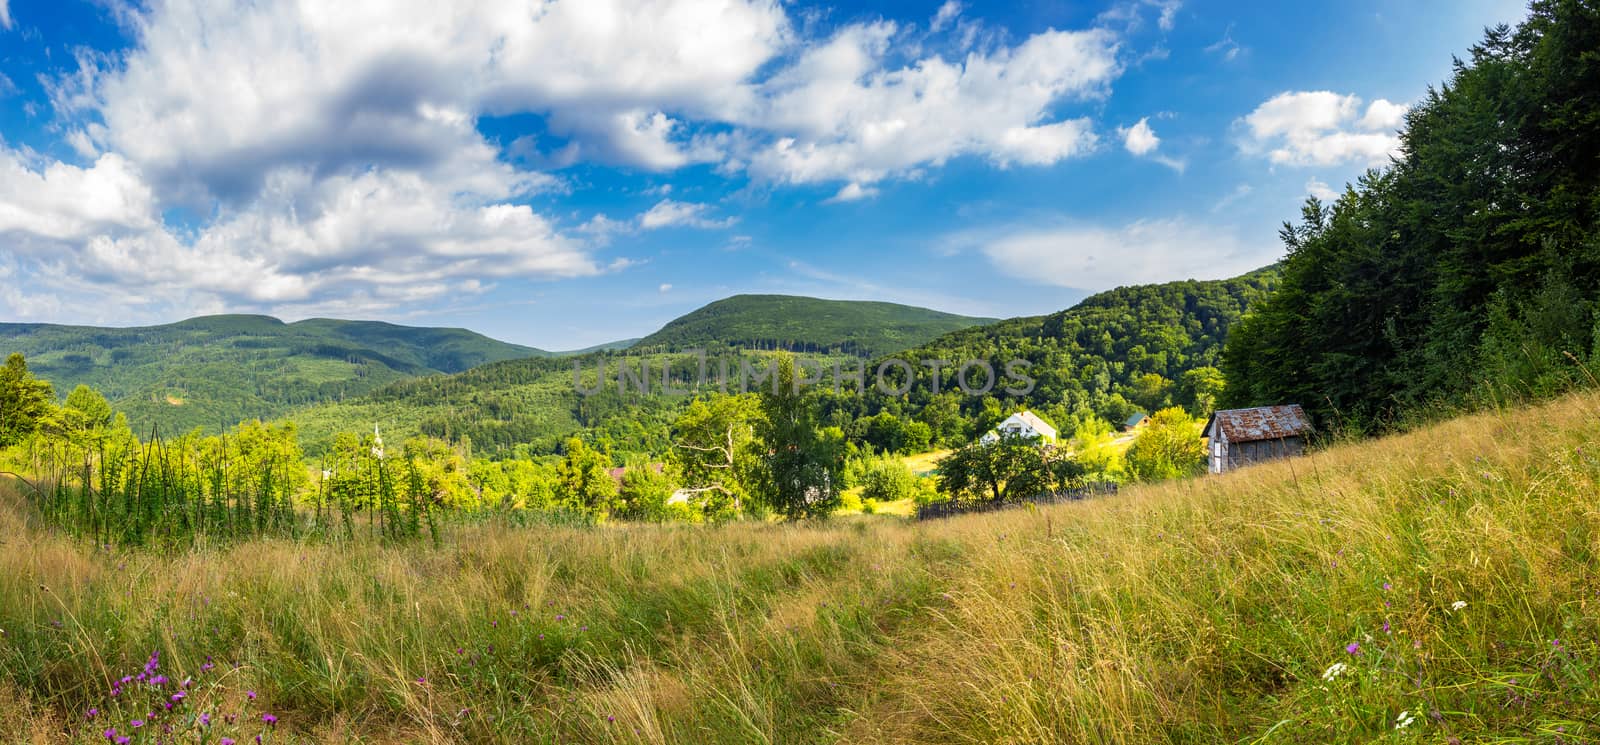 panorama of village and meadow on hillside near mountain forest  by Pellinni